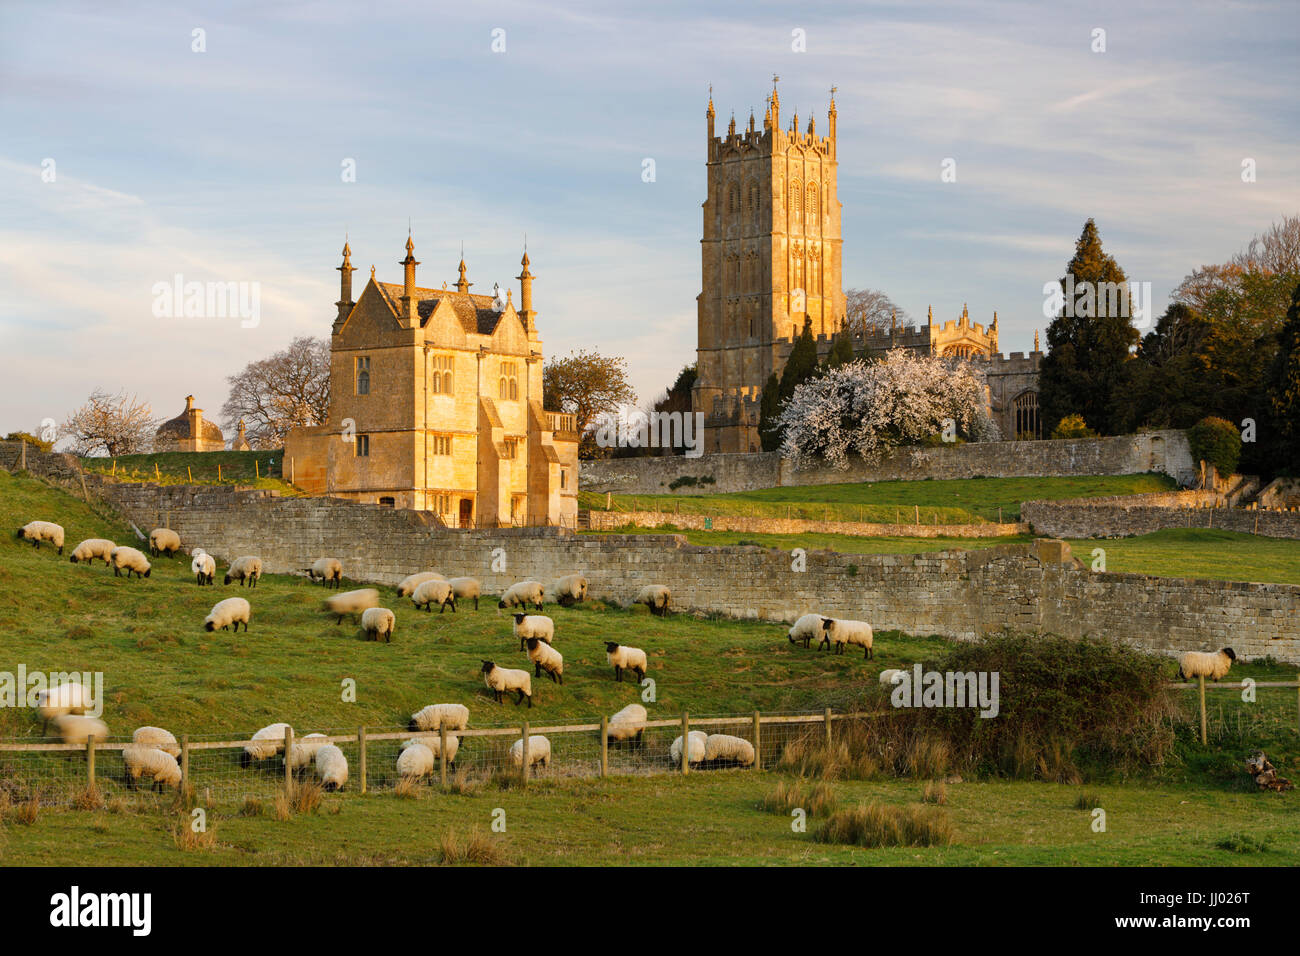 St James' Church and East Banqueting House of old Campden House, Chipping Campden, Cotswolds, Gloucestershire, England, United Kingdom, Europe Stock Photo